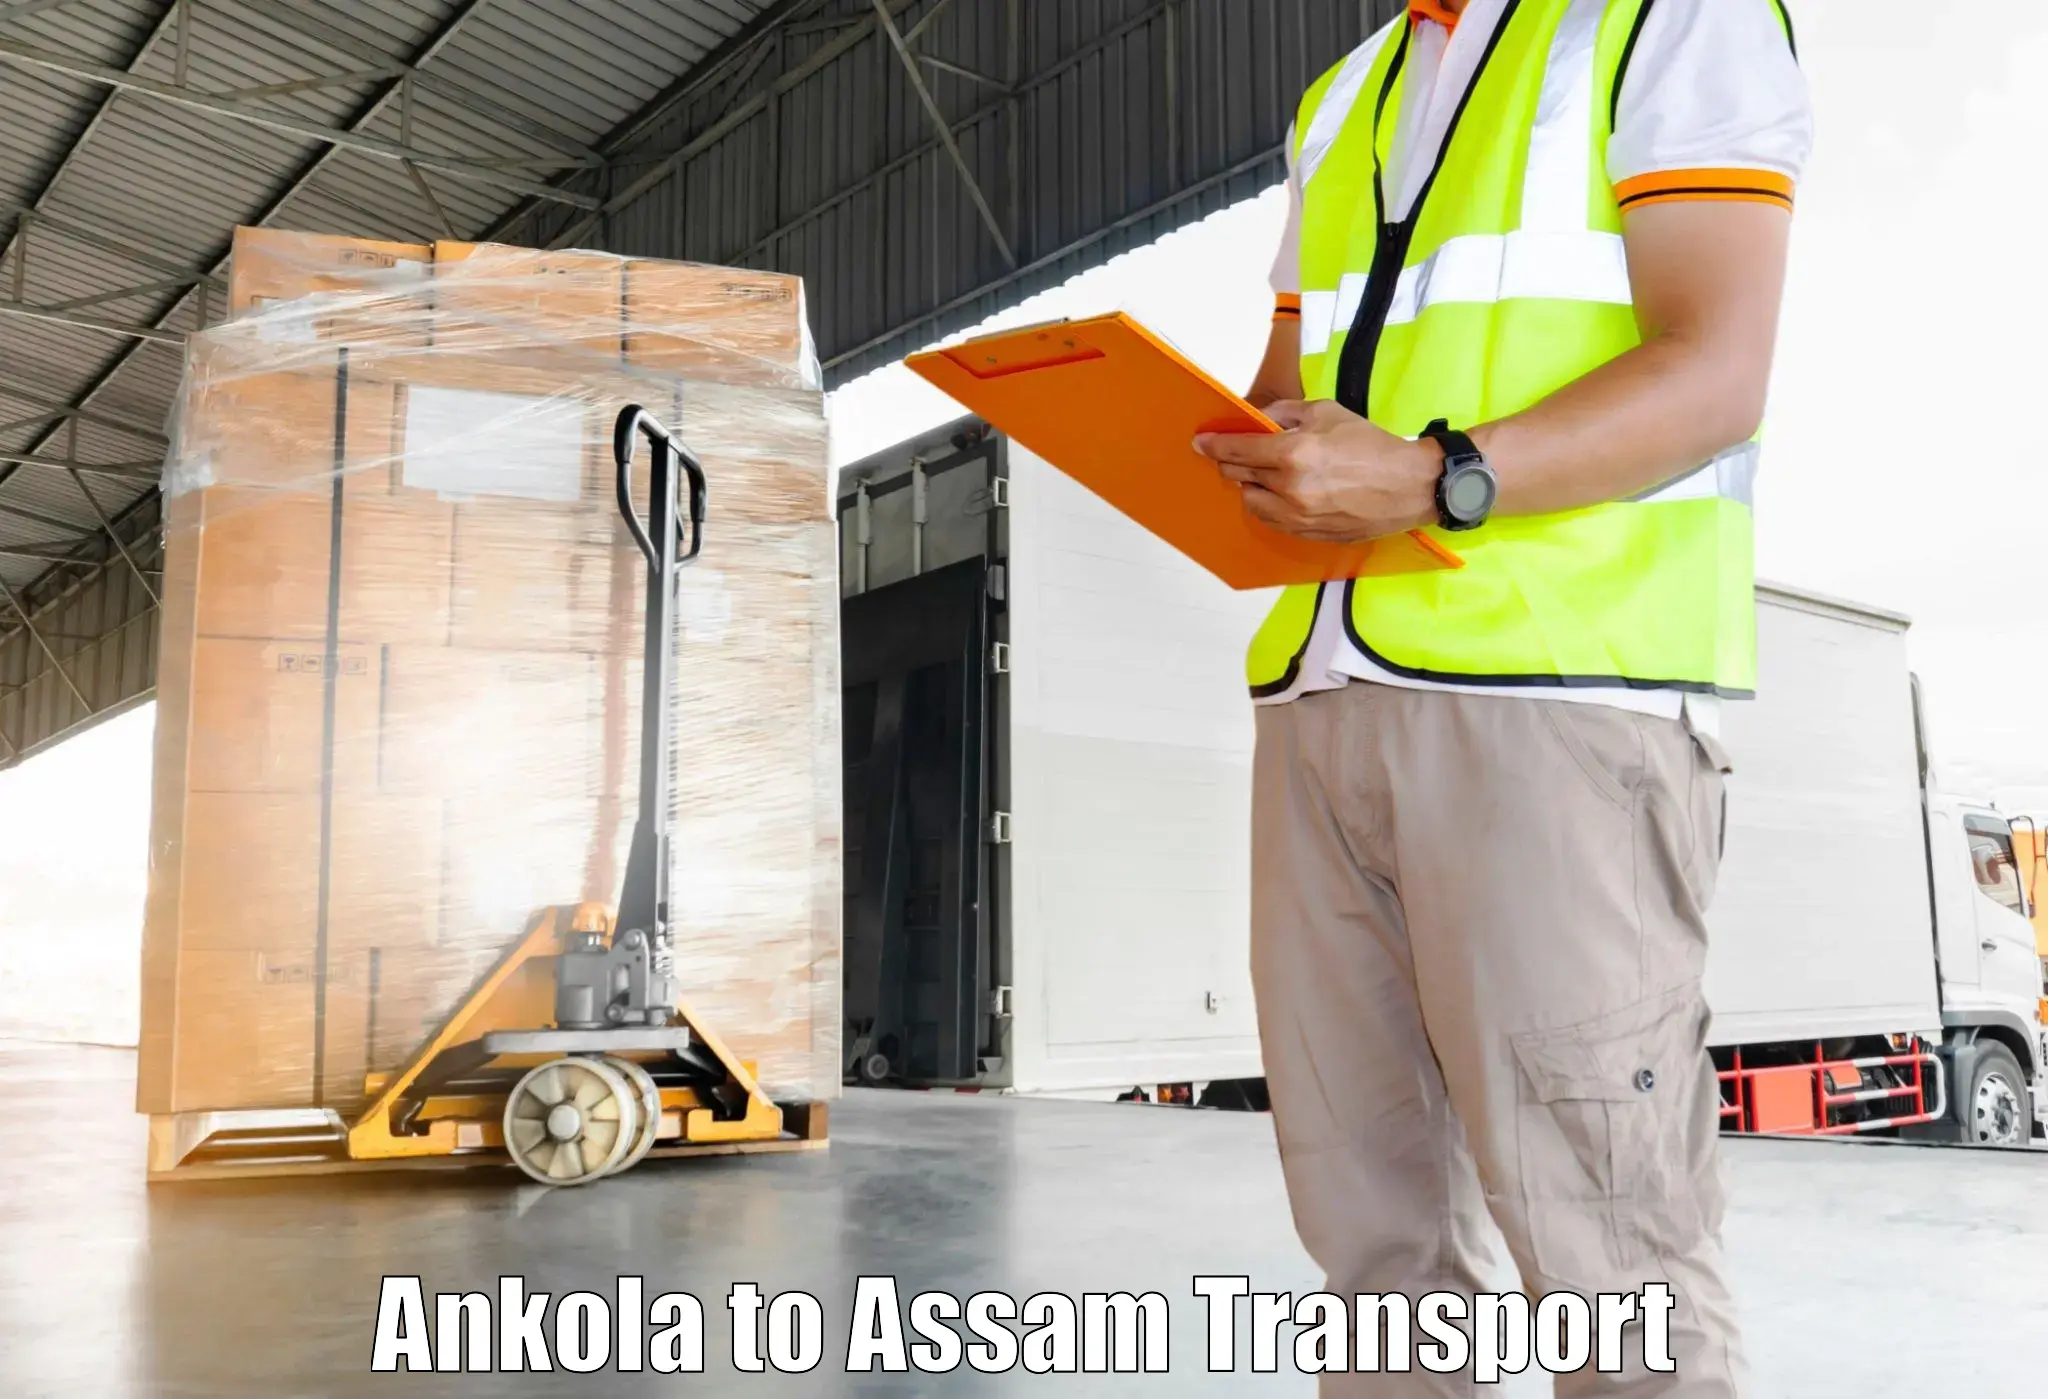 Transport bike from one state to another in Ankola to Lala Assam